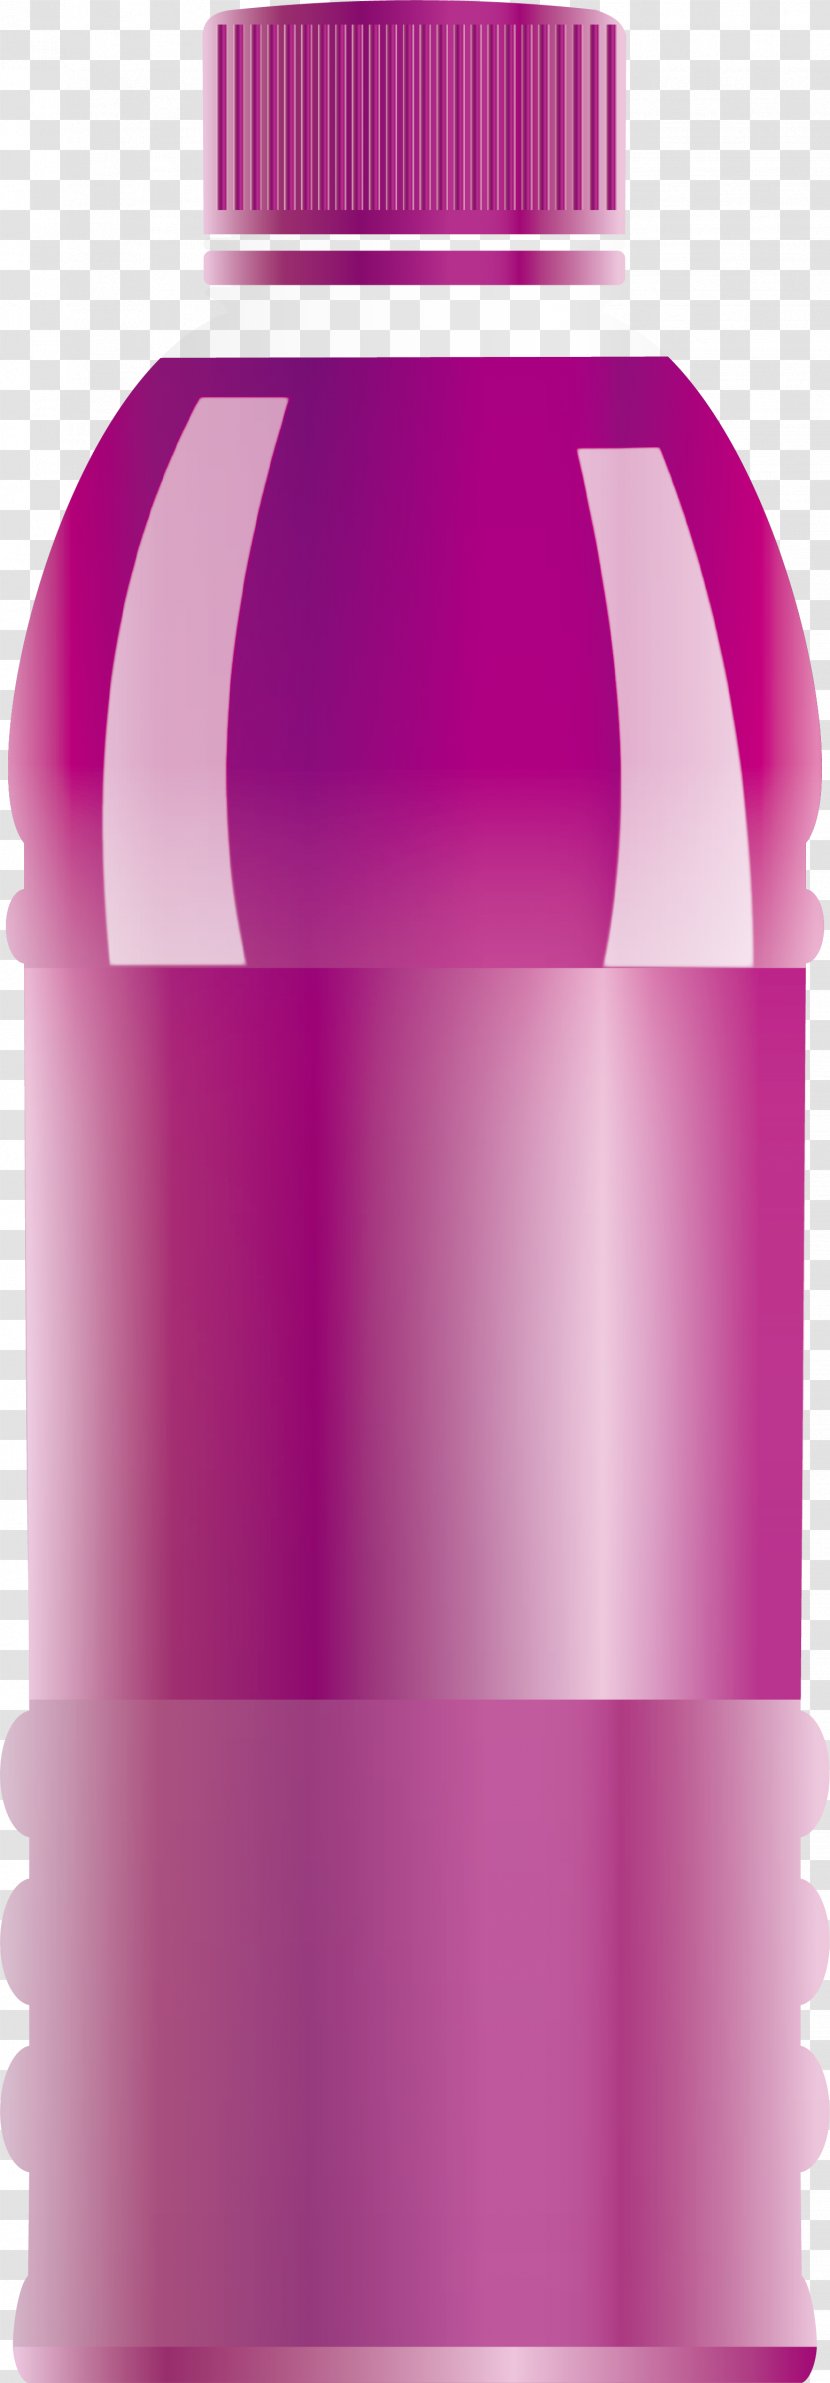 Bottle Packaging And Labeling Material Metal - Purple Transparent PNG